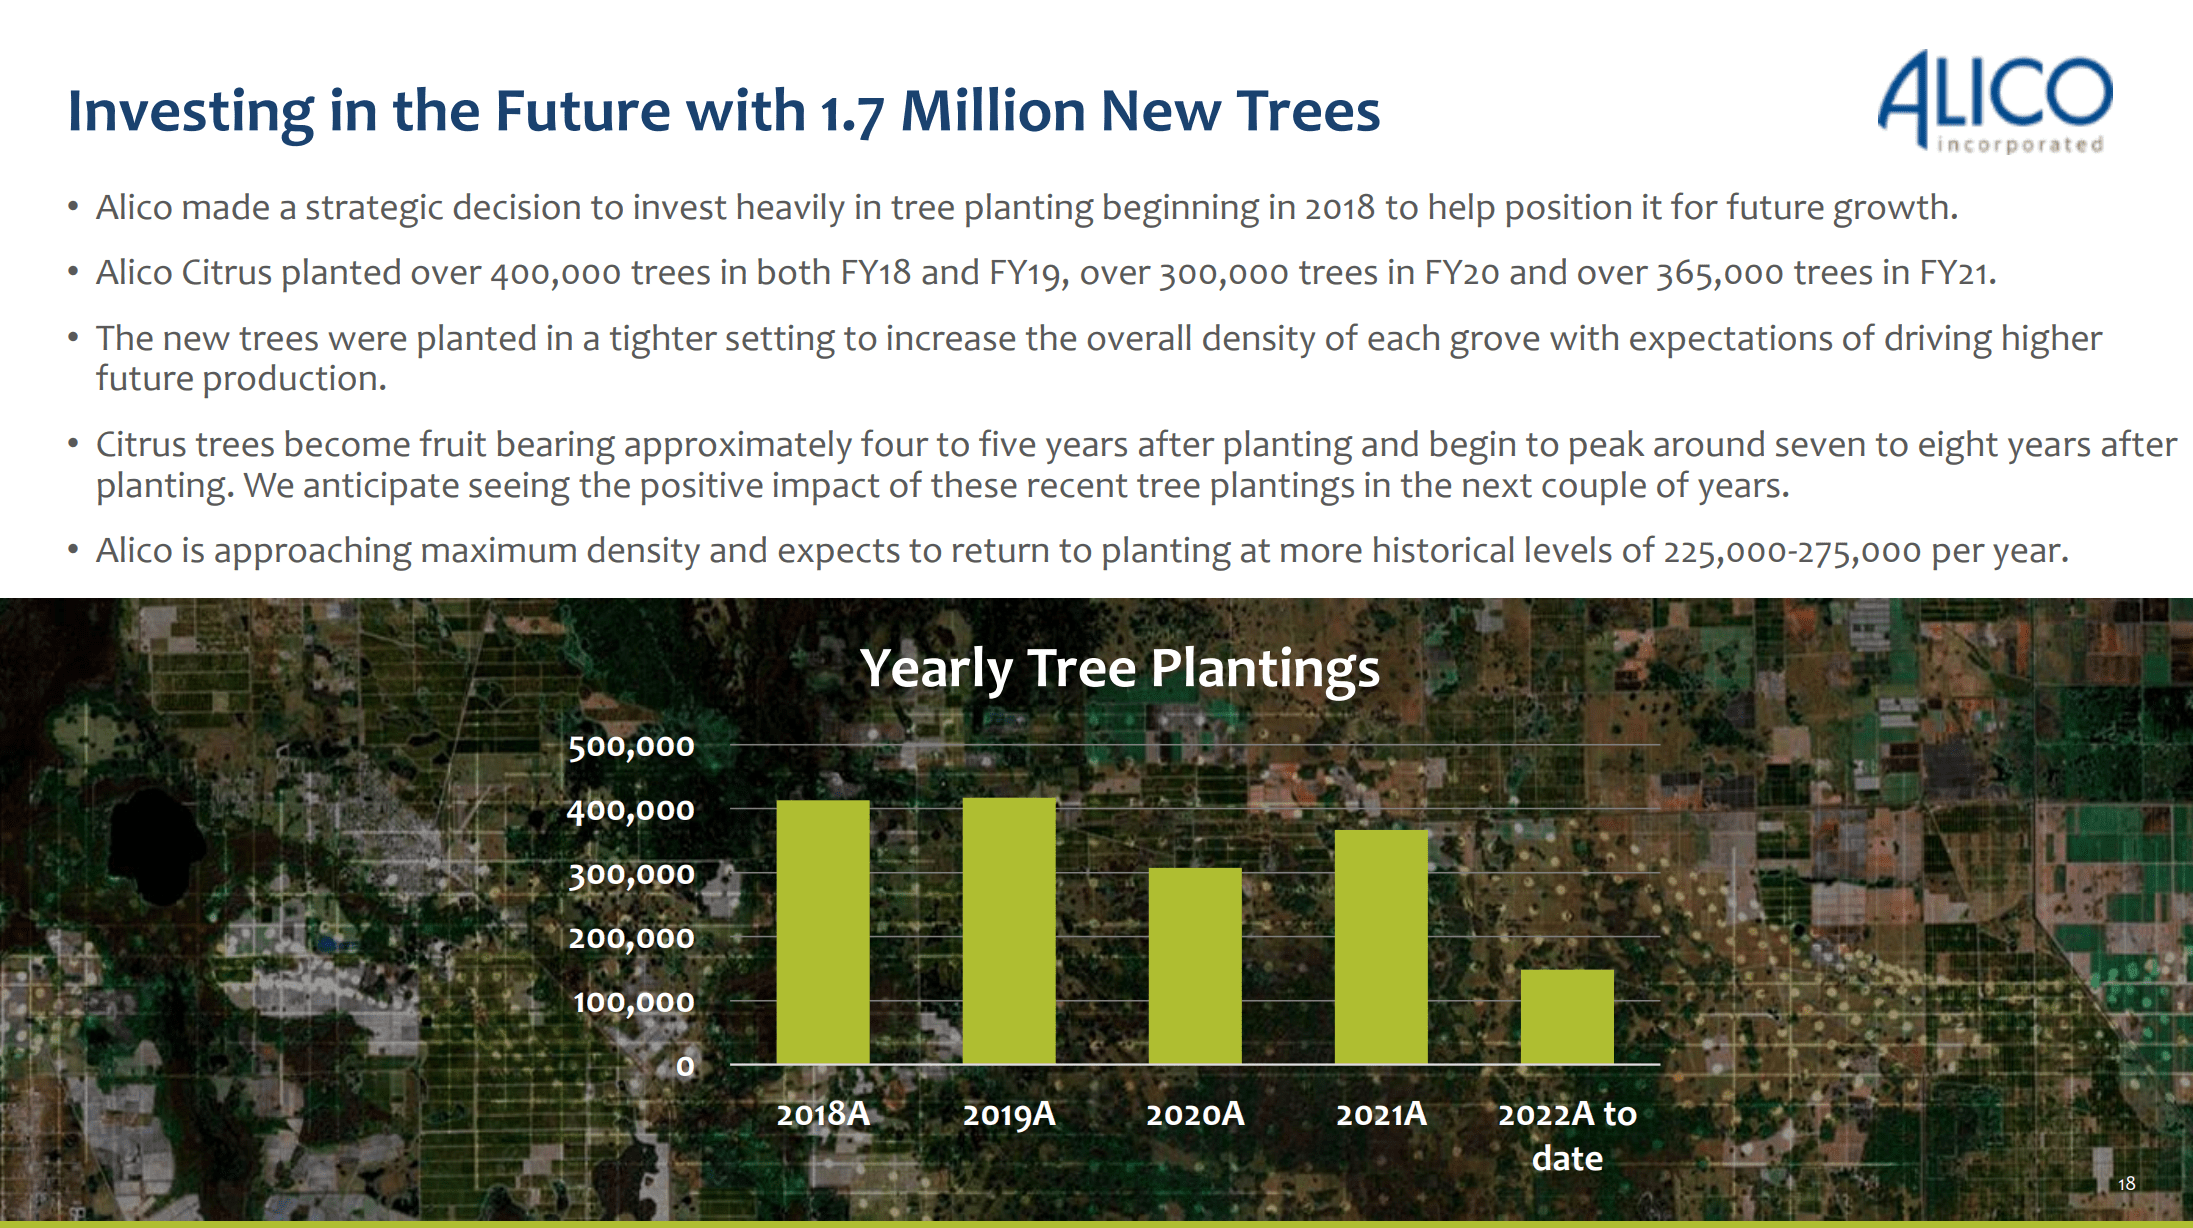 Alico planted an additional ~700k trees beyond replacement level